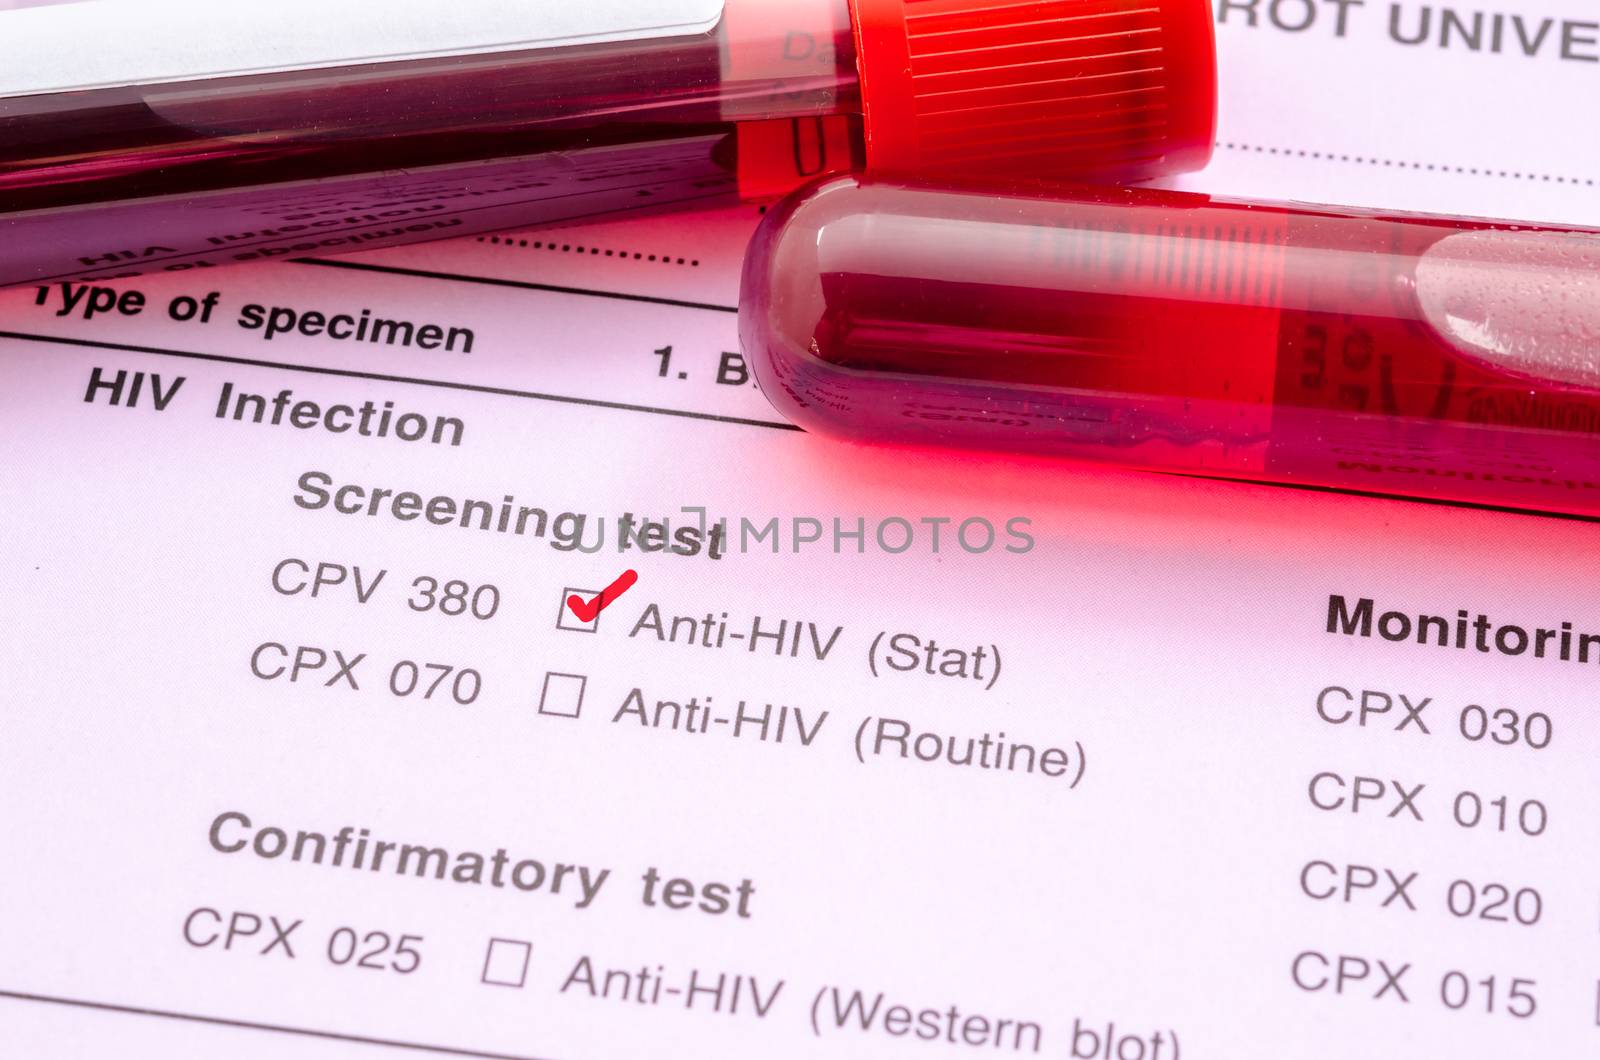 Sample blood collection tube with HIV test label on HIV infection screening test form.